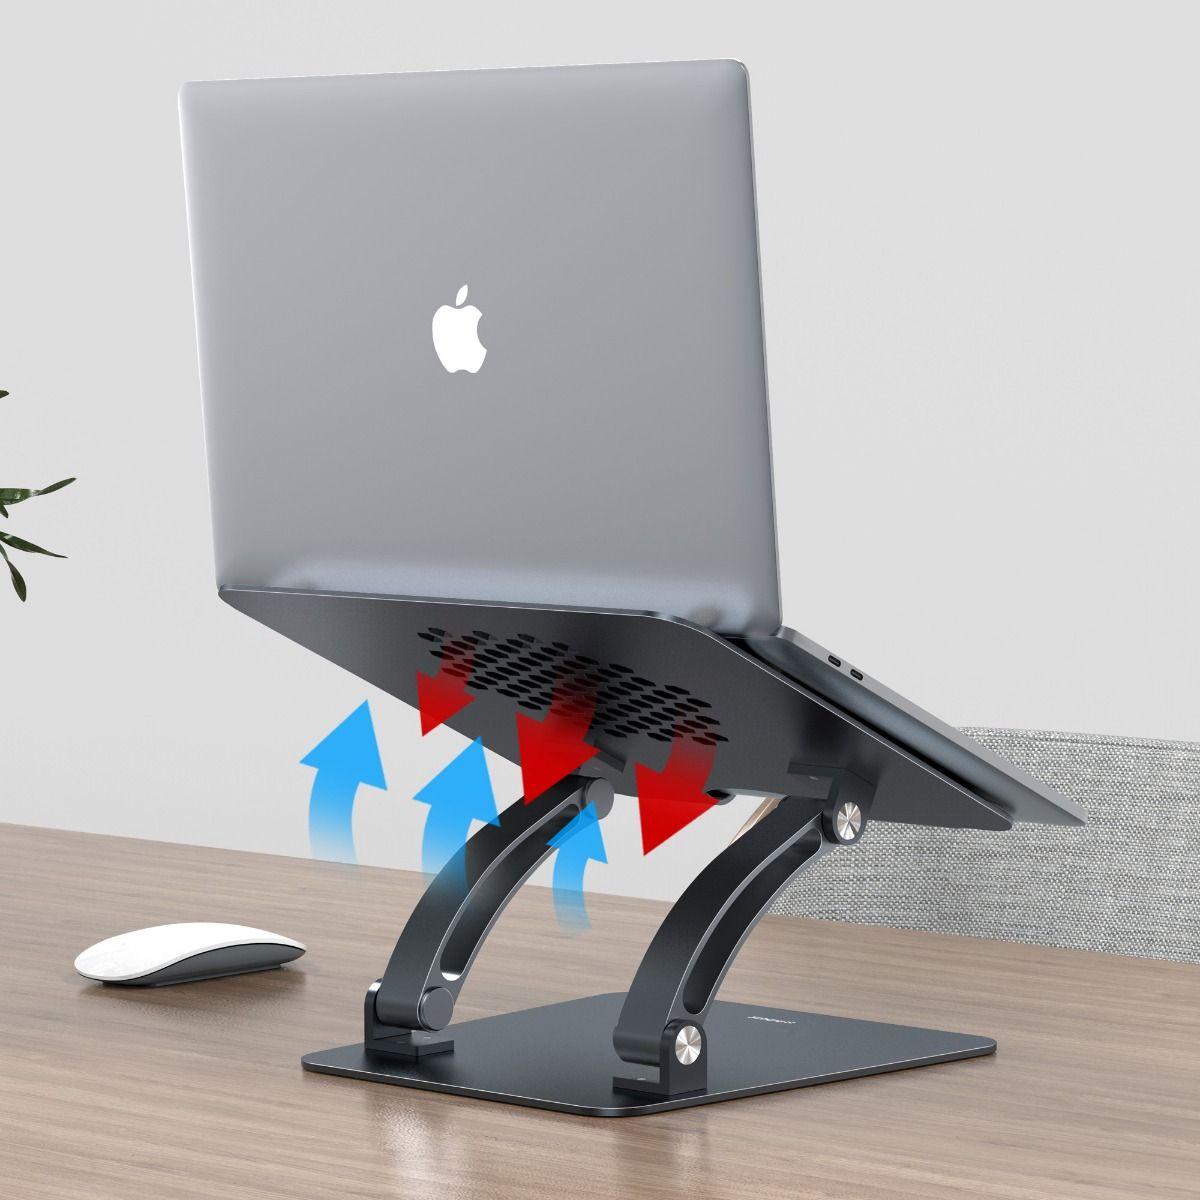 Mbeat Stage S6 Adjustable Elevated Laptop And Macbook Stand